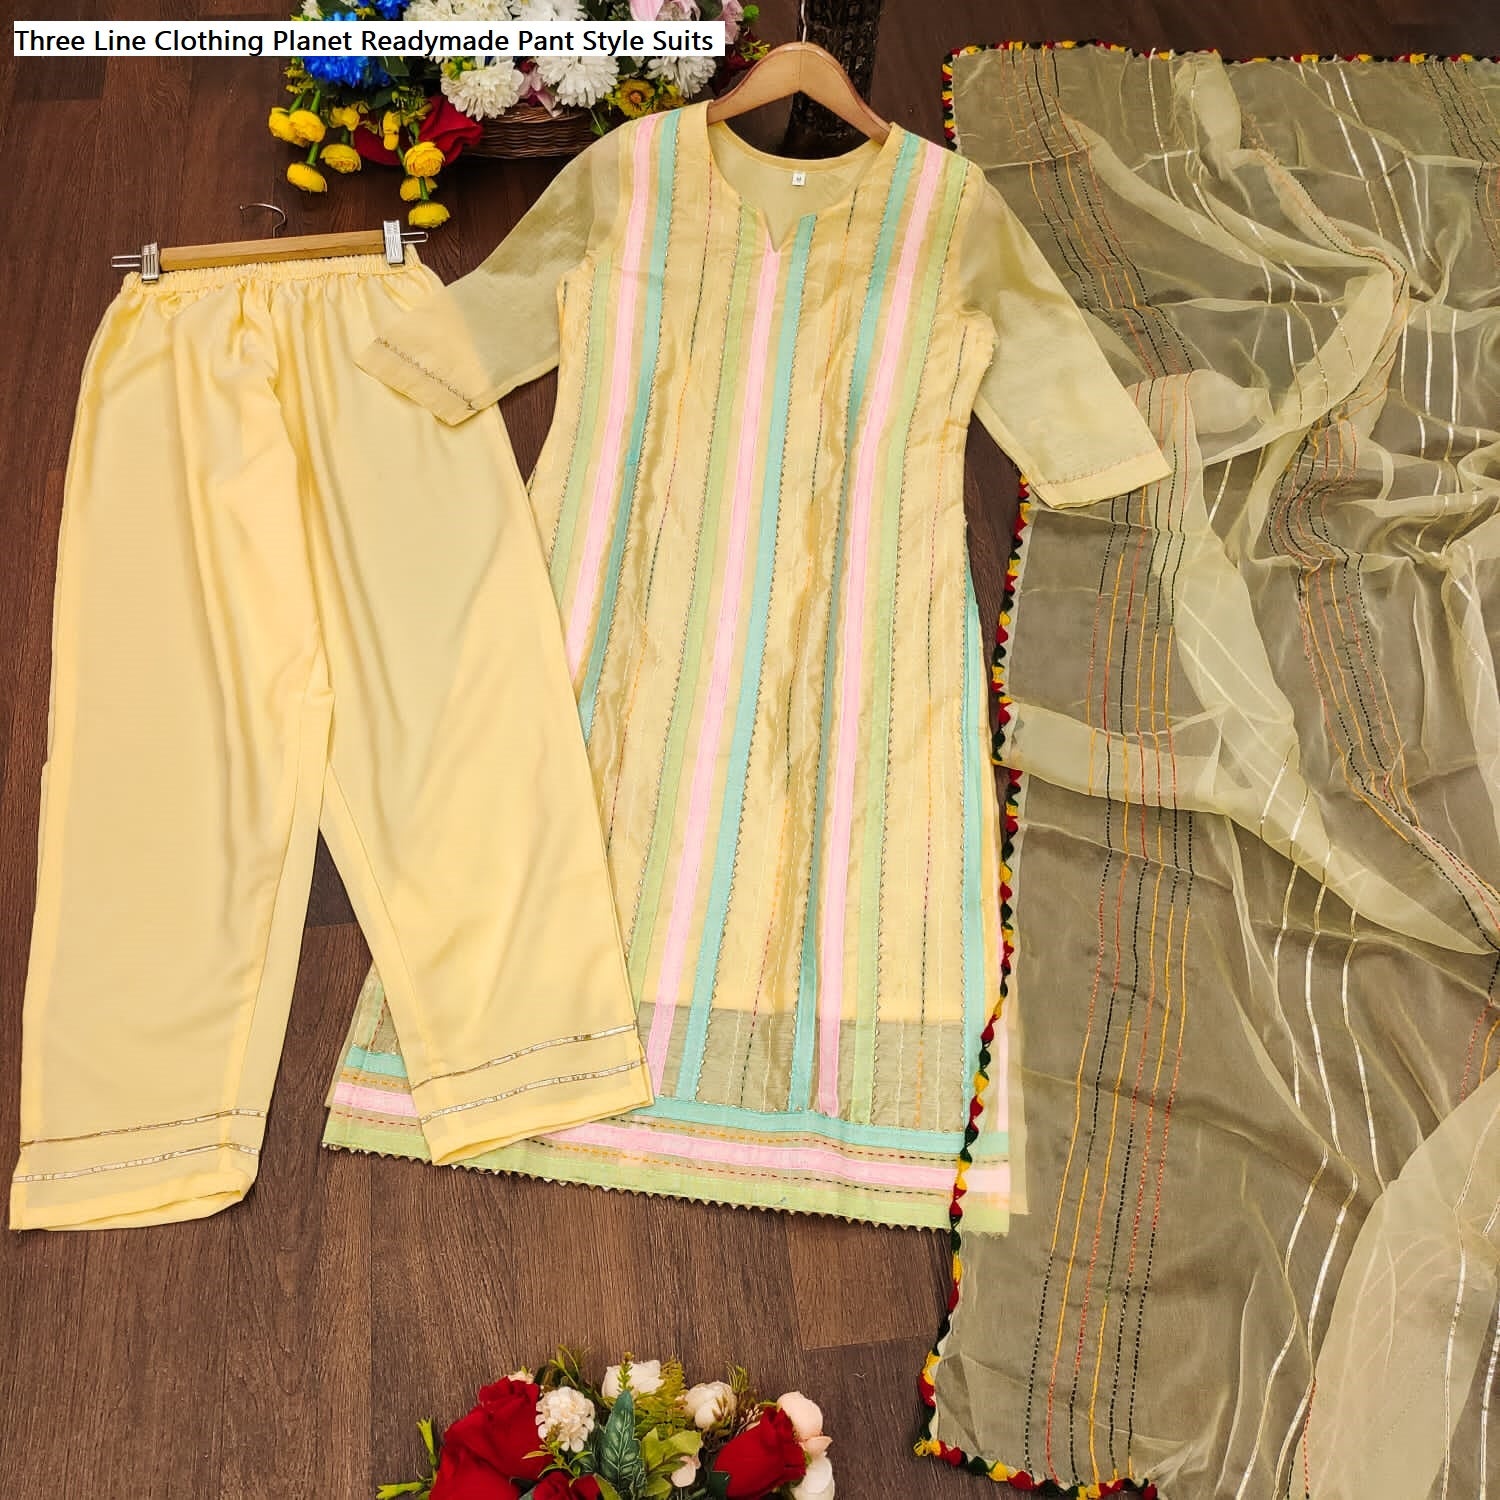 Three Line Clothing Planet Chanderi Readymade Pant Style Suits